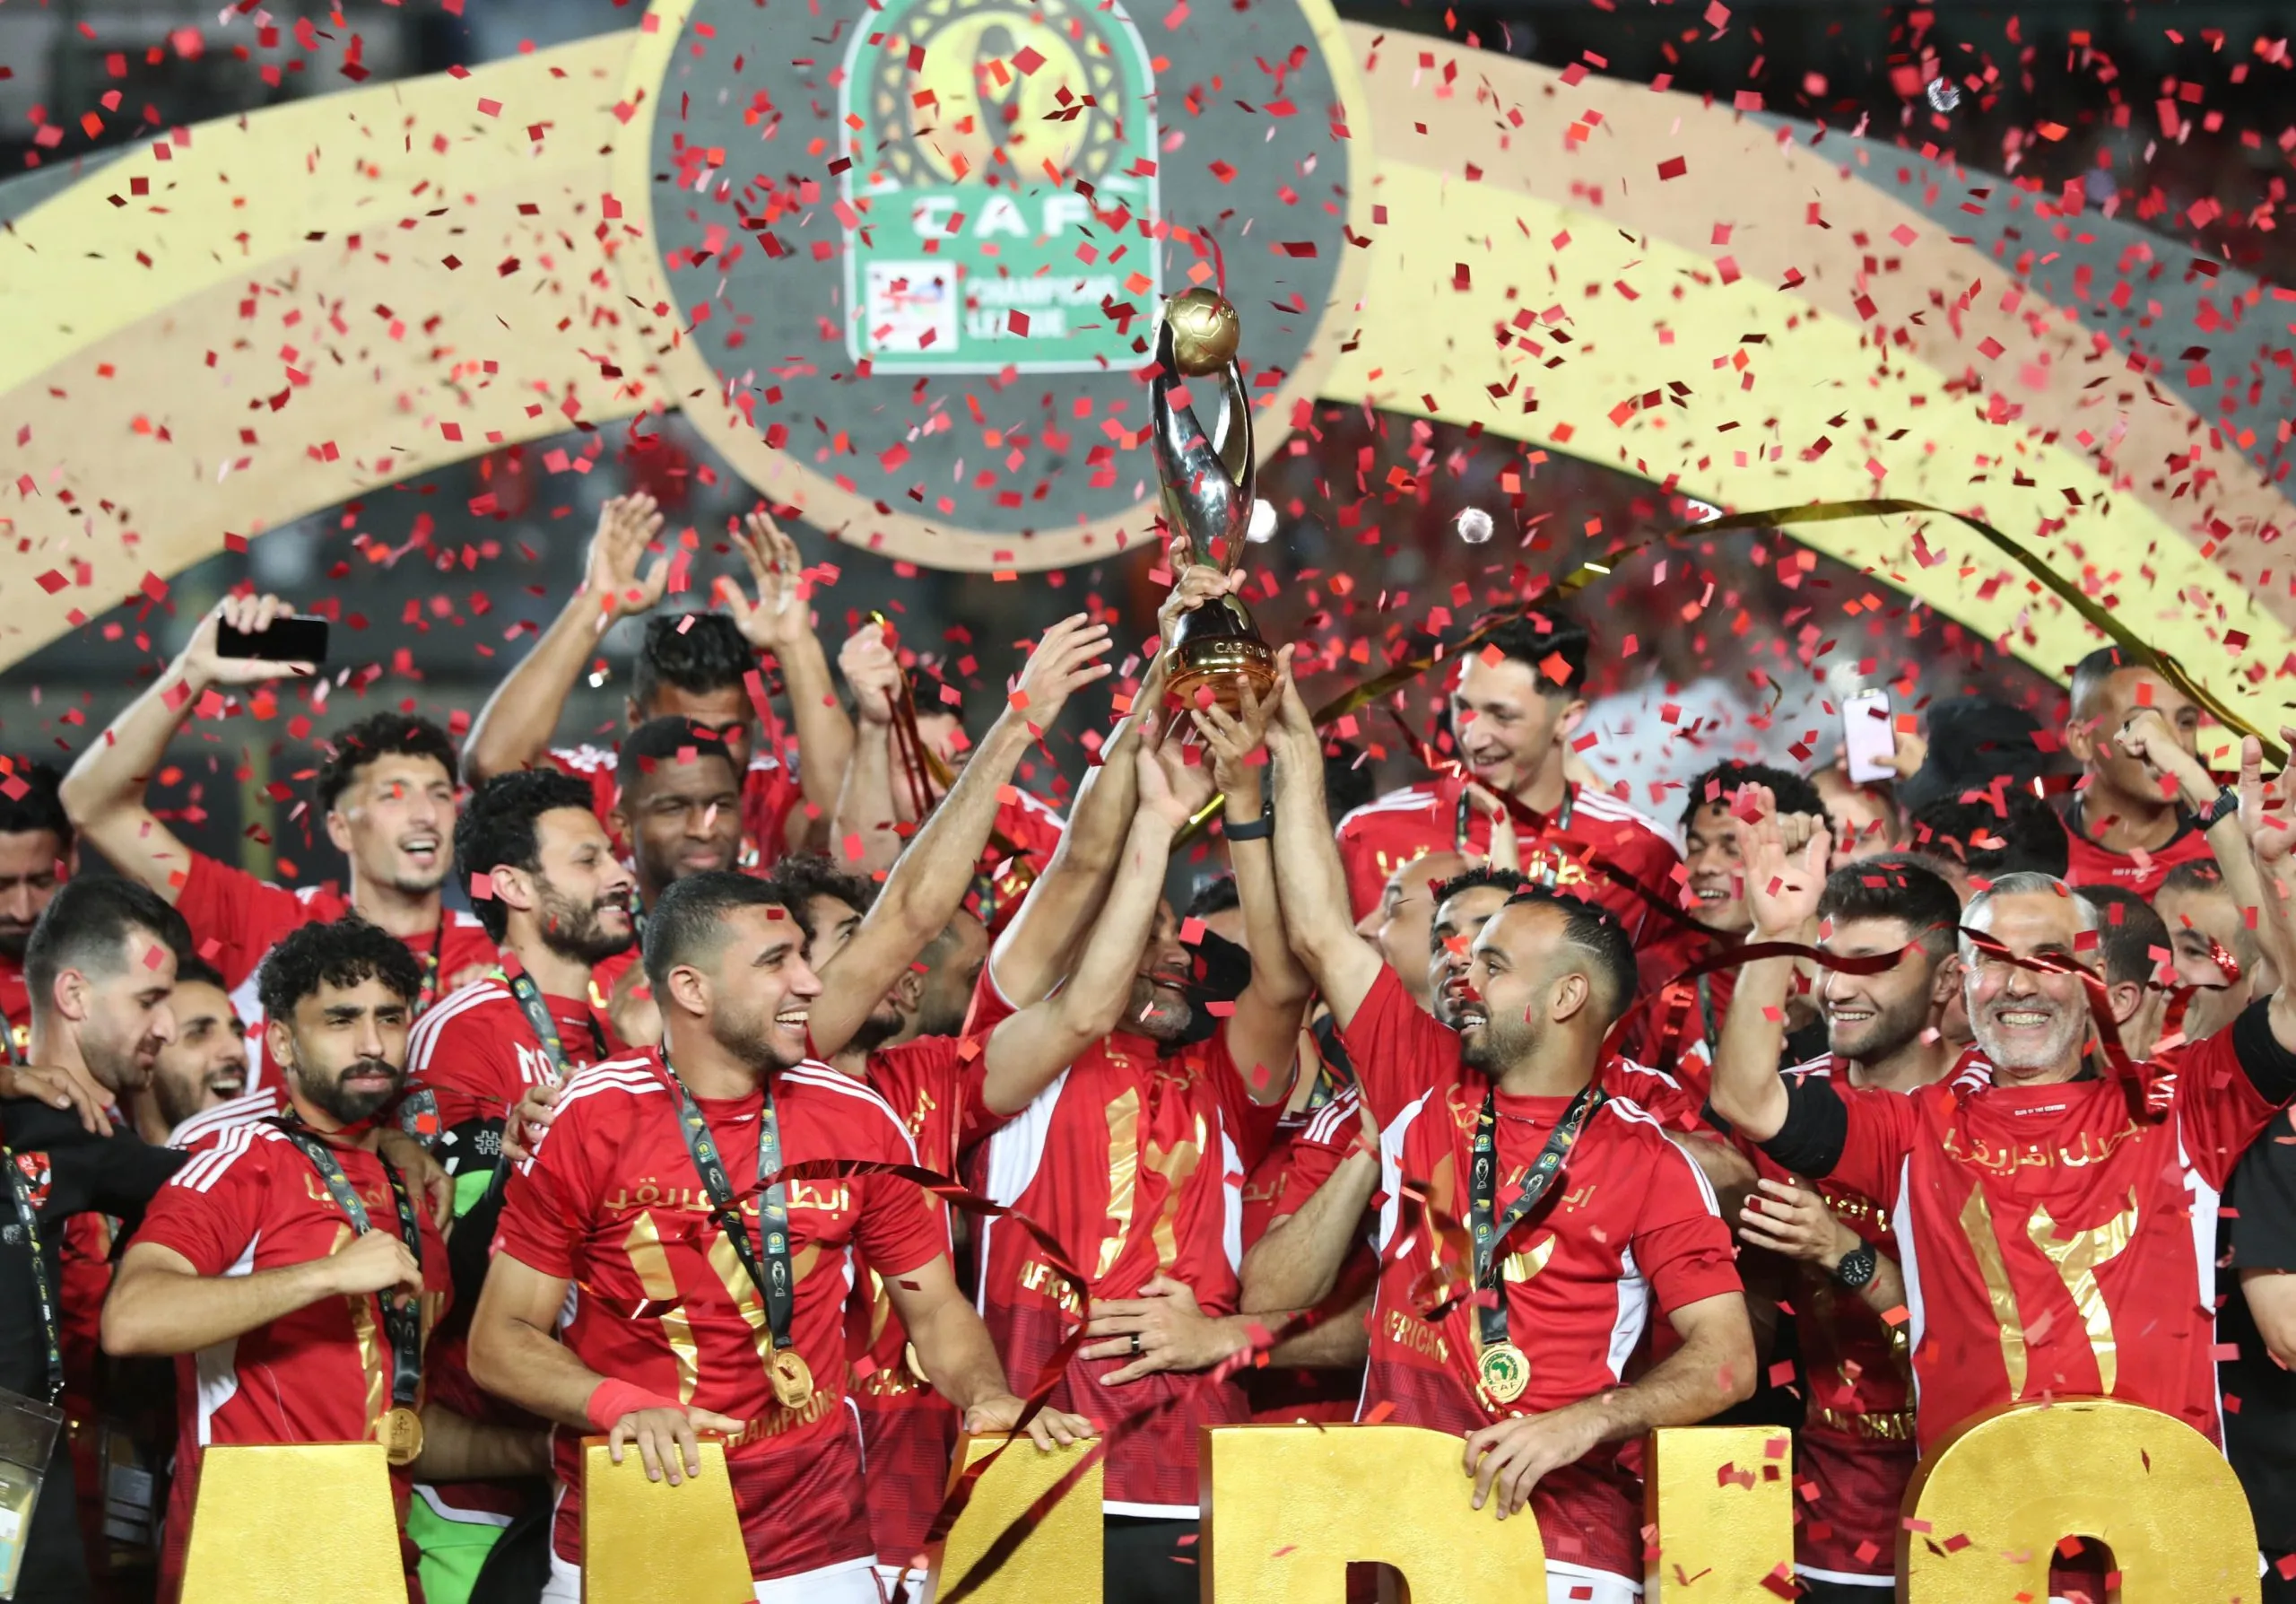 An early own goal from Roger Aholou secured a 1-0 victory for Al Ahly of Egypt against Tunisian side Esperance, earning them a record-extending 12th CAF Champions League title.